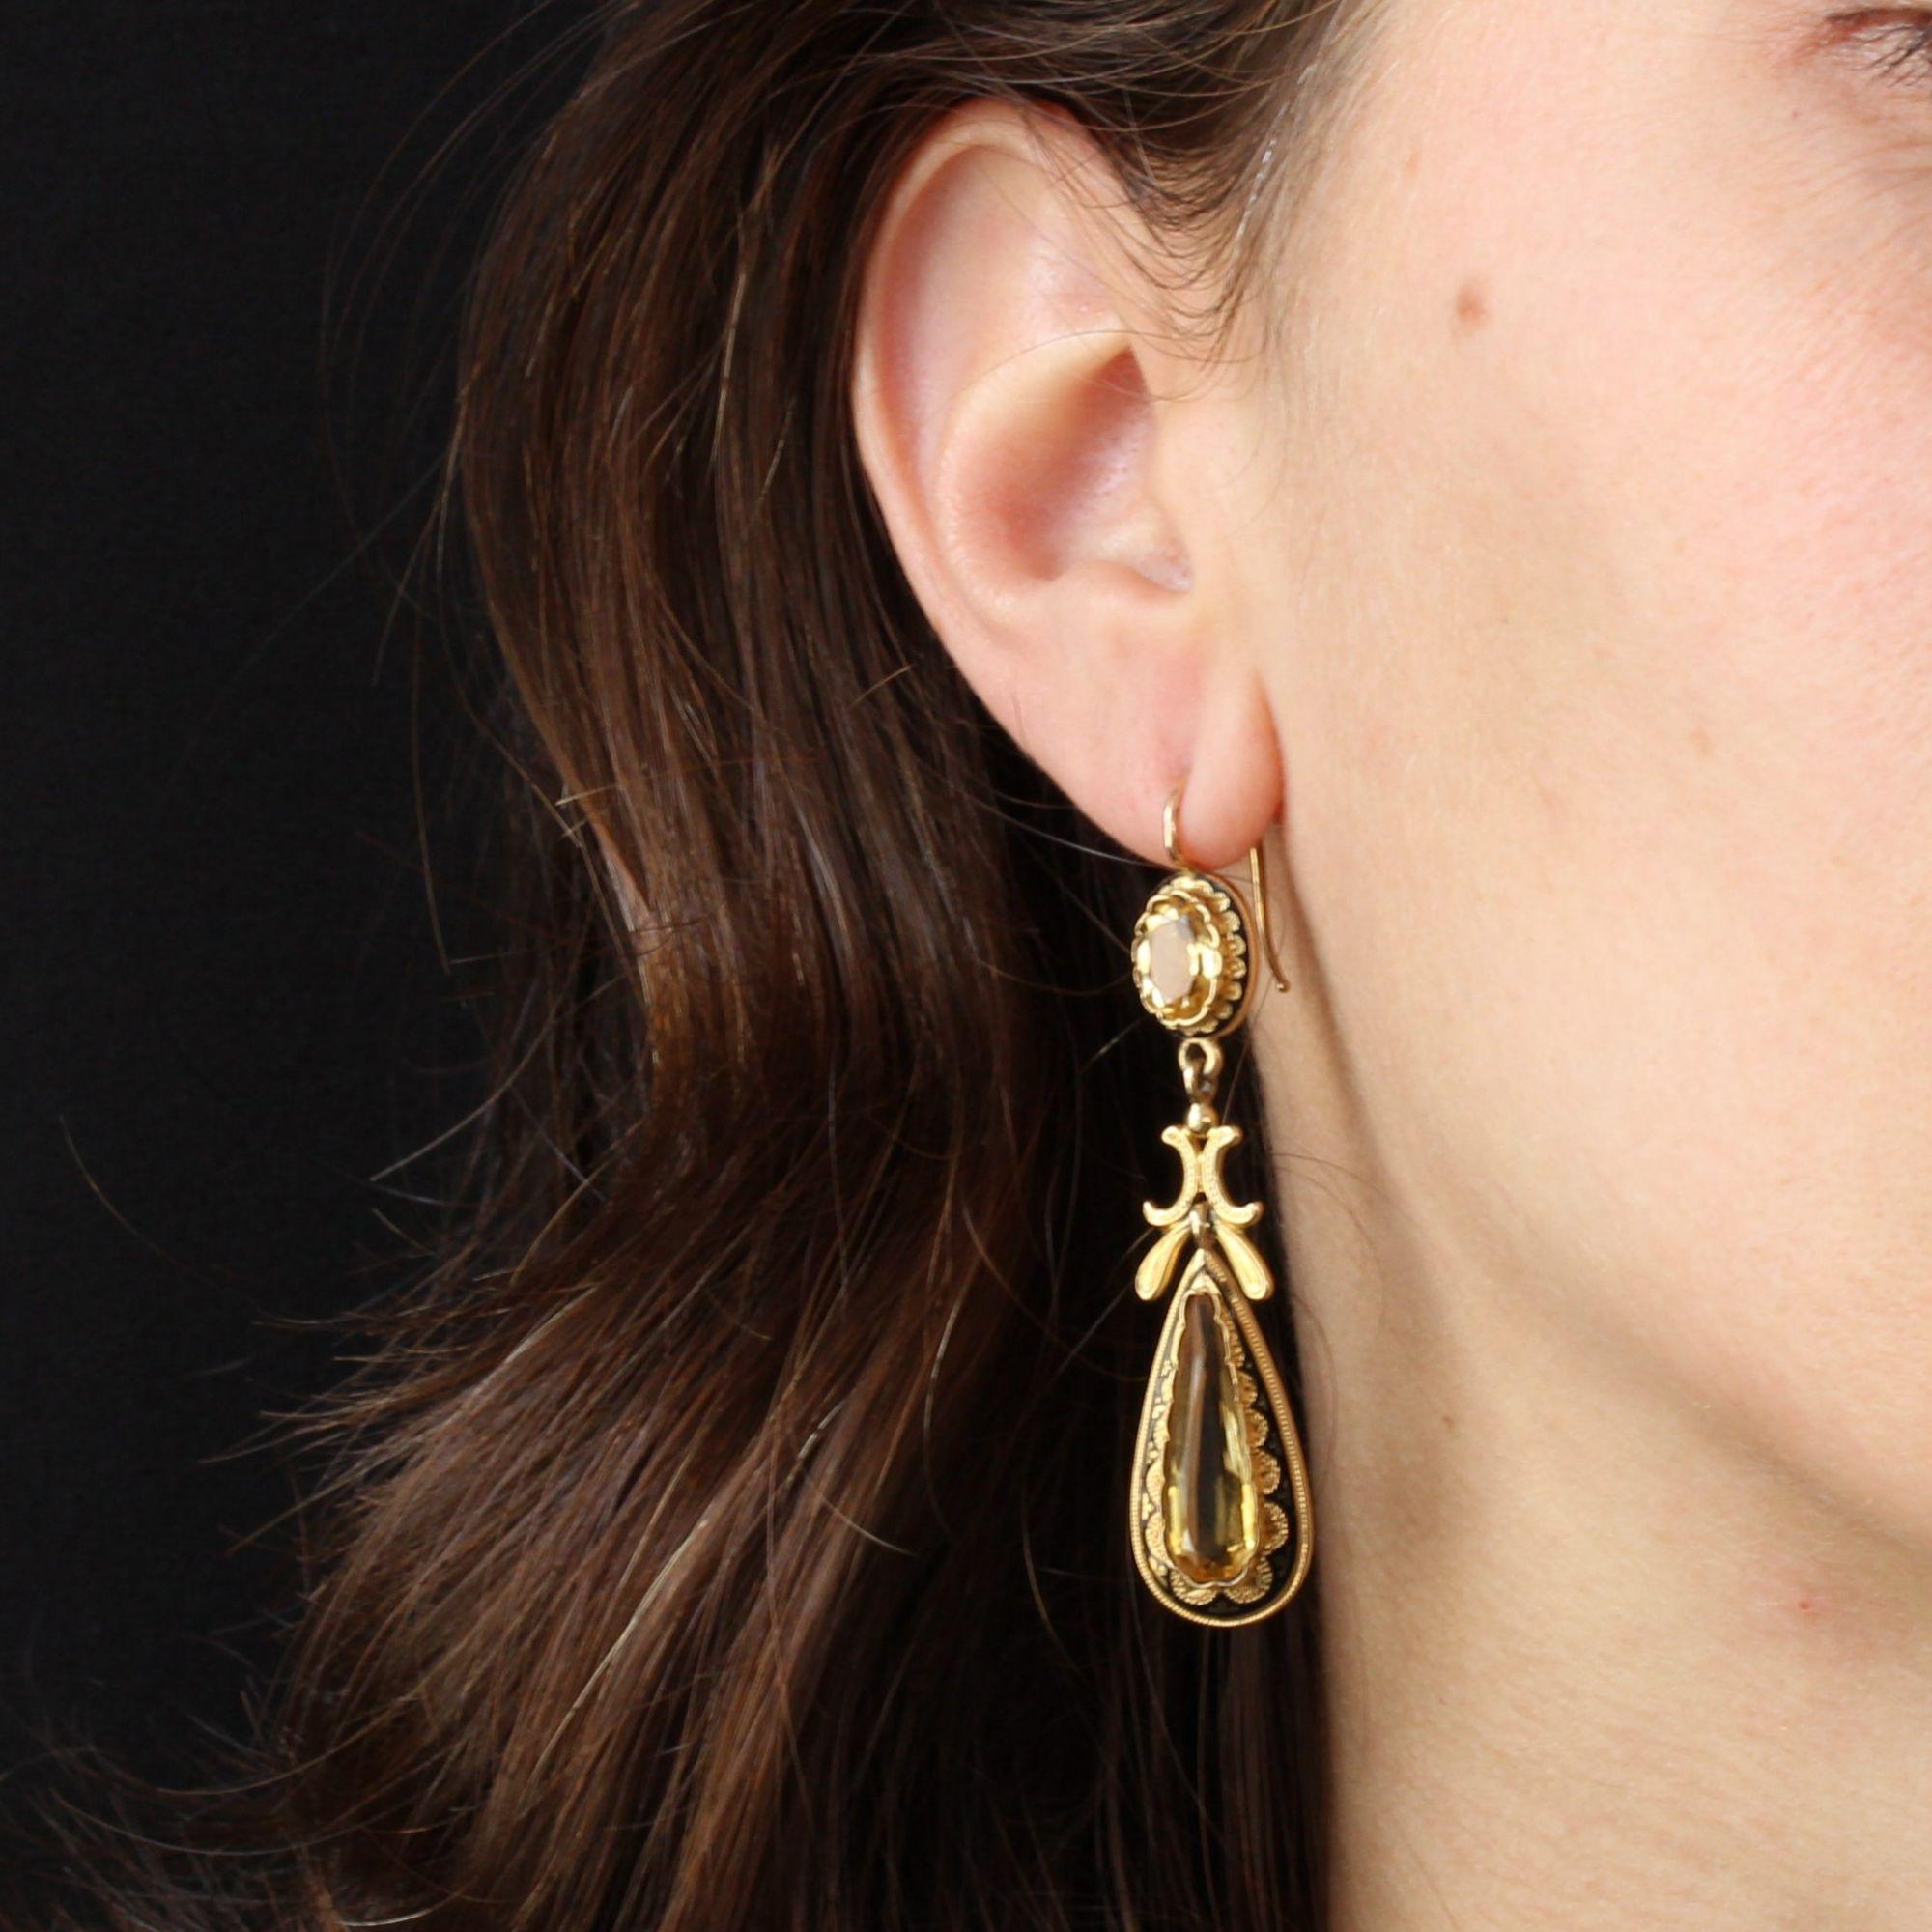 For pierced ears.
Earrings in 18 karat yellow gold, horse head hallmark.
Each antique earring is made of a citrine in polylobate setting, surrounded by small petals chiseled on a black enamel. It holds in tassel a long drop of citrine of the same